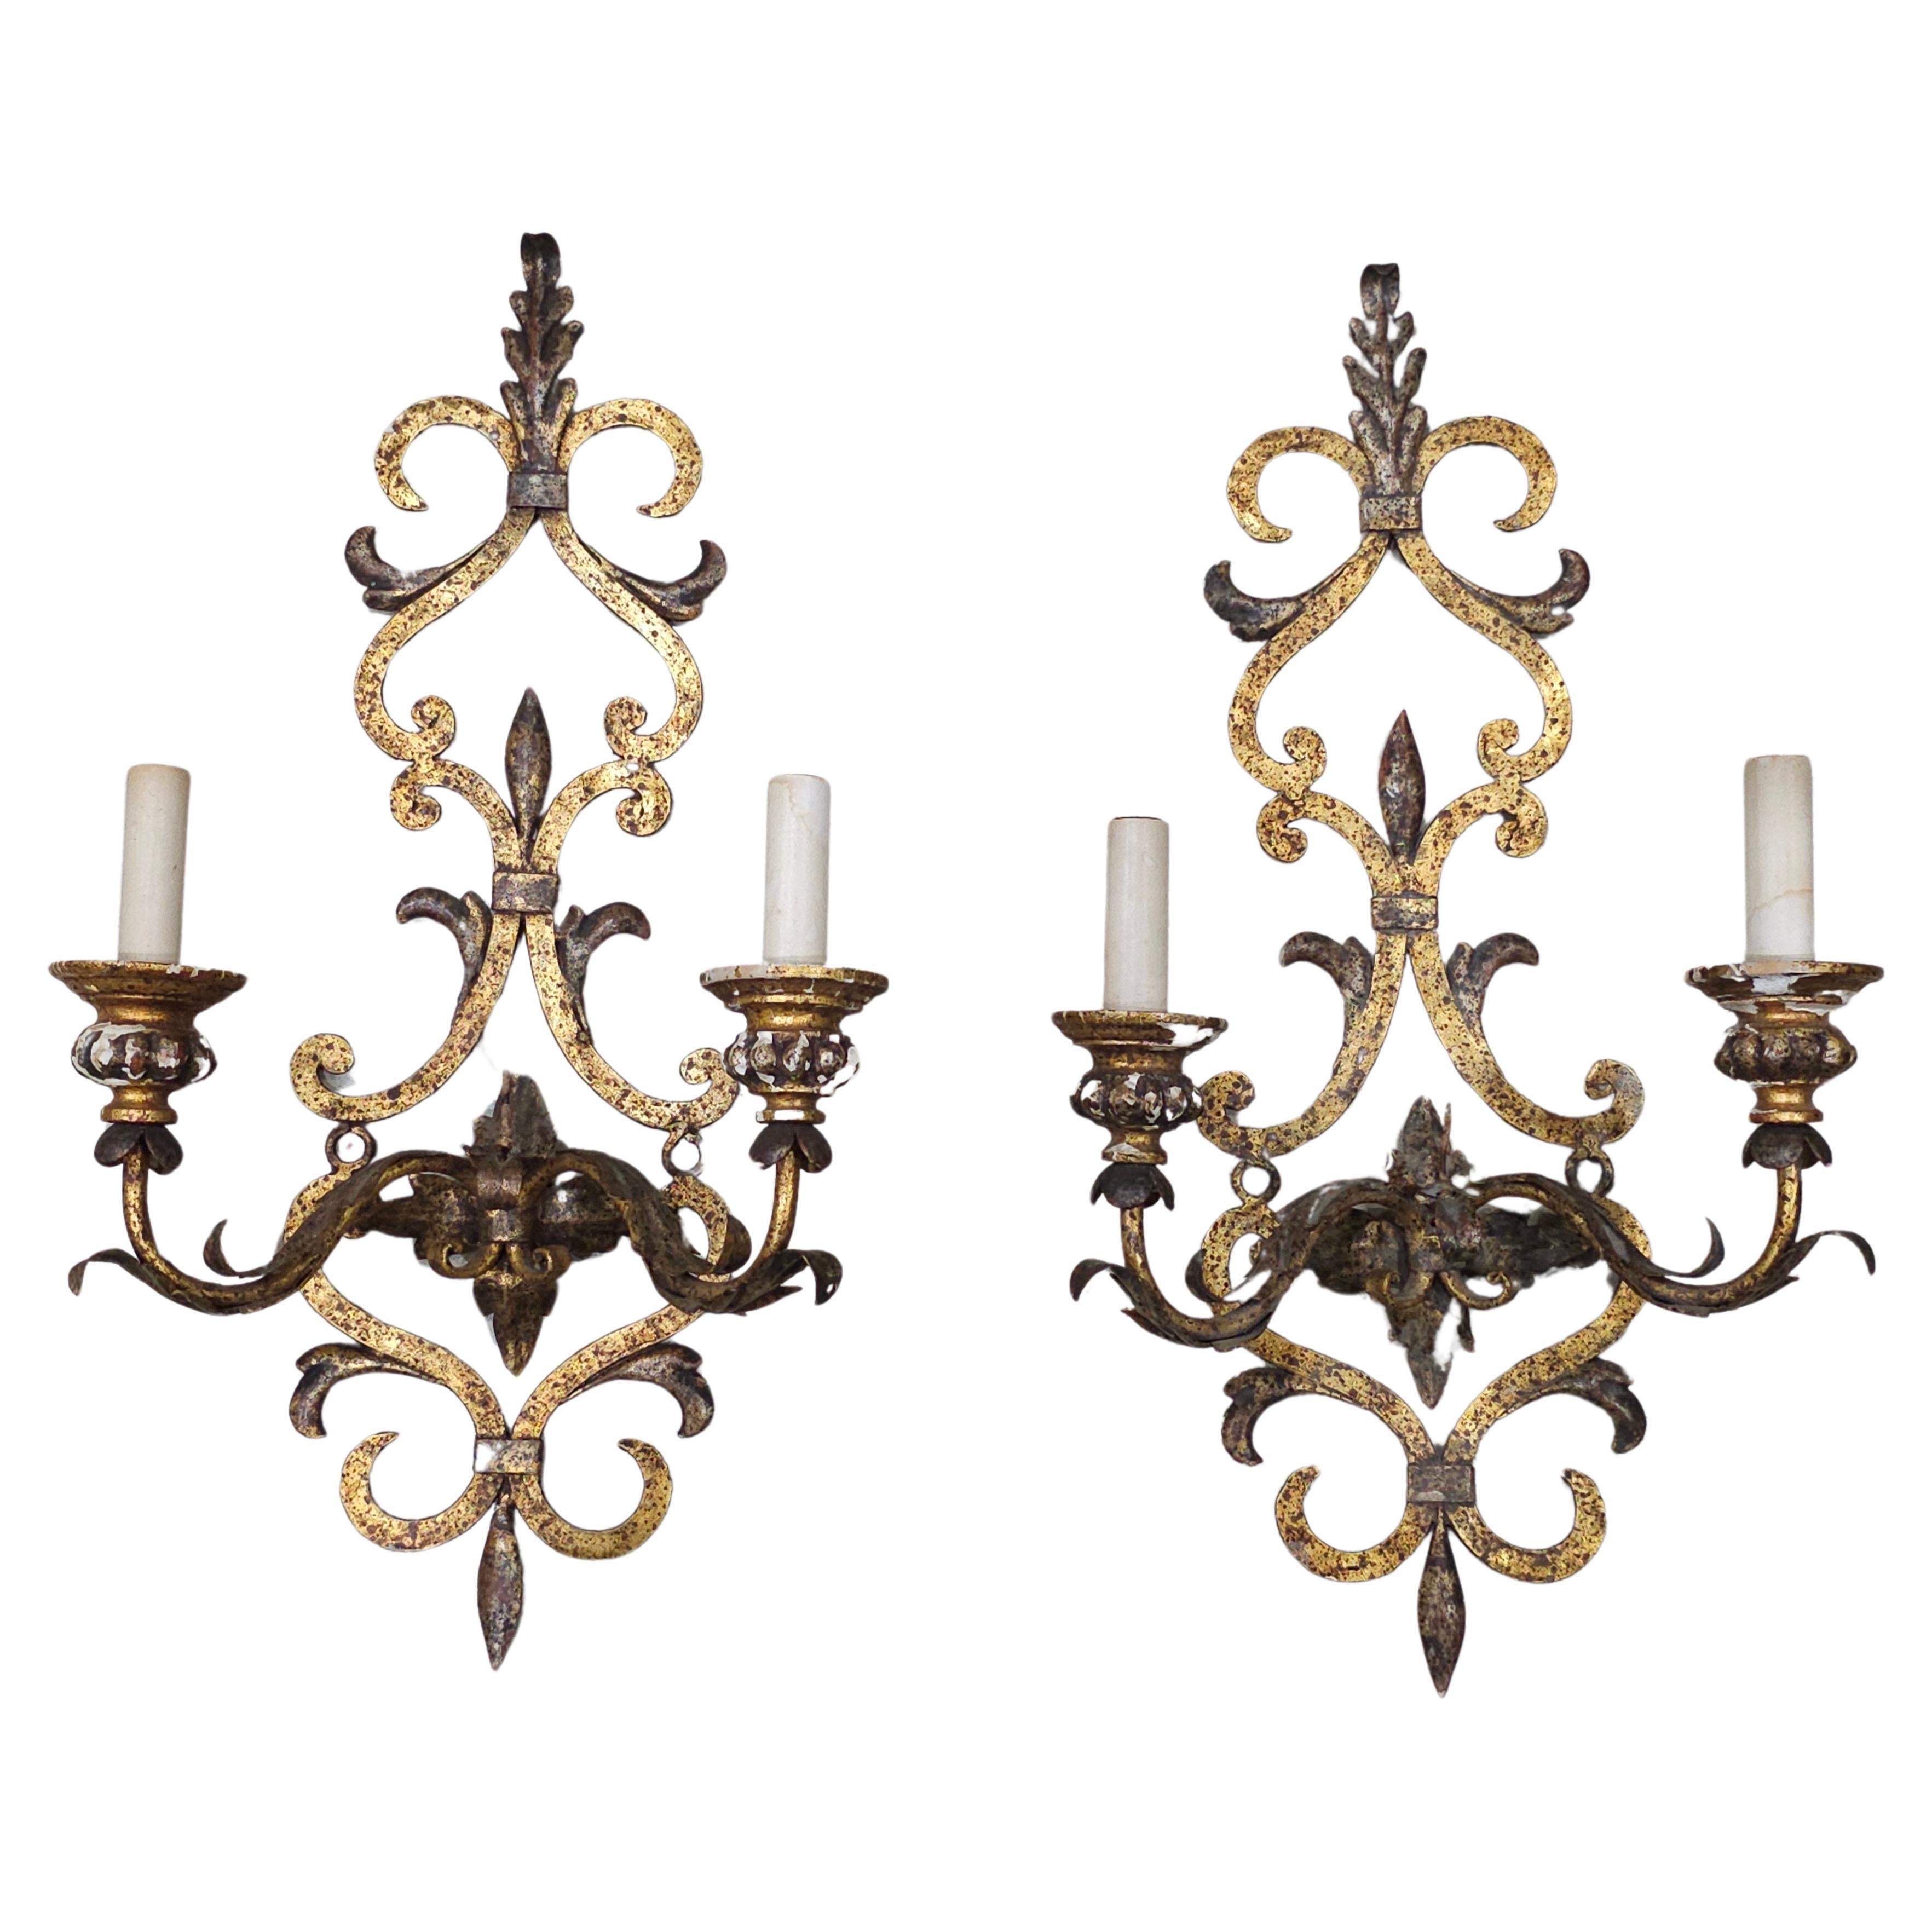 Pair of Italian Gilt Metal and Composite Leaf Motif Wall Sconces